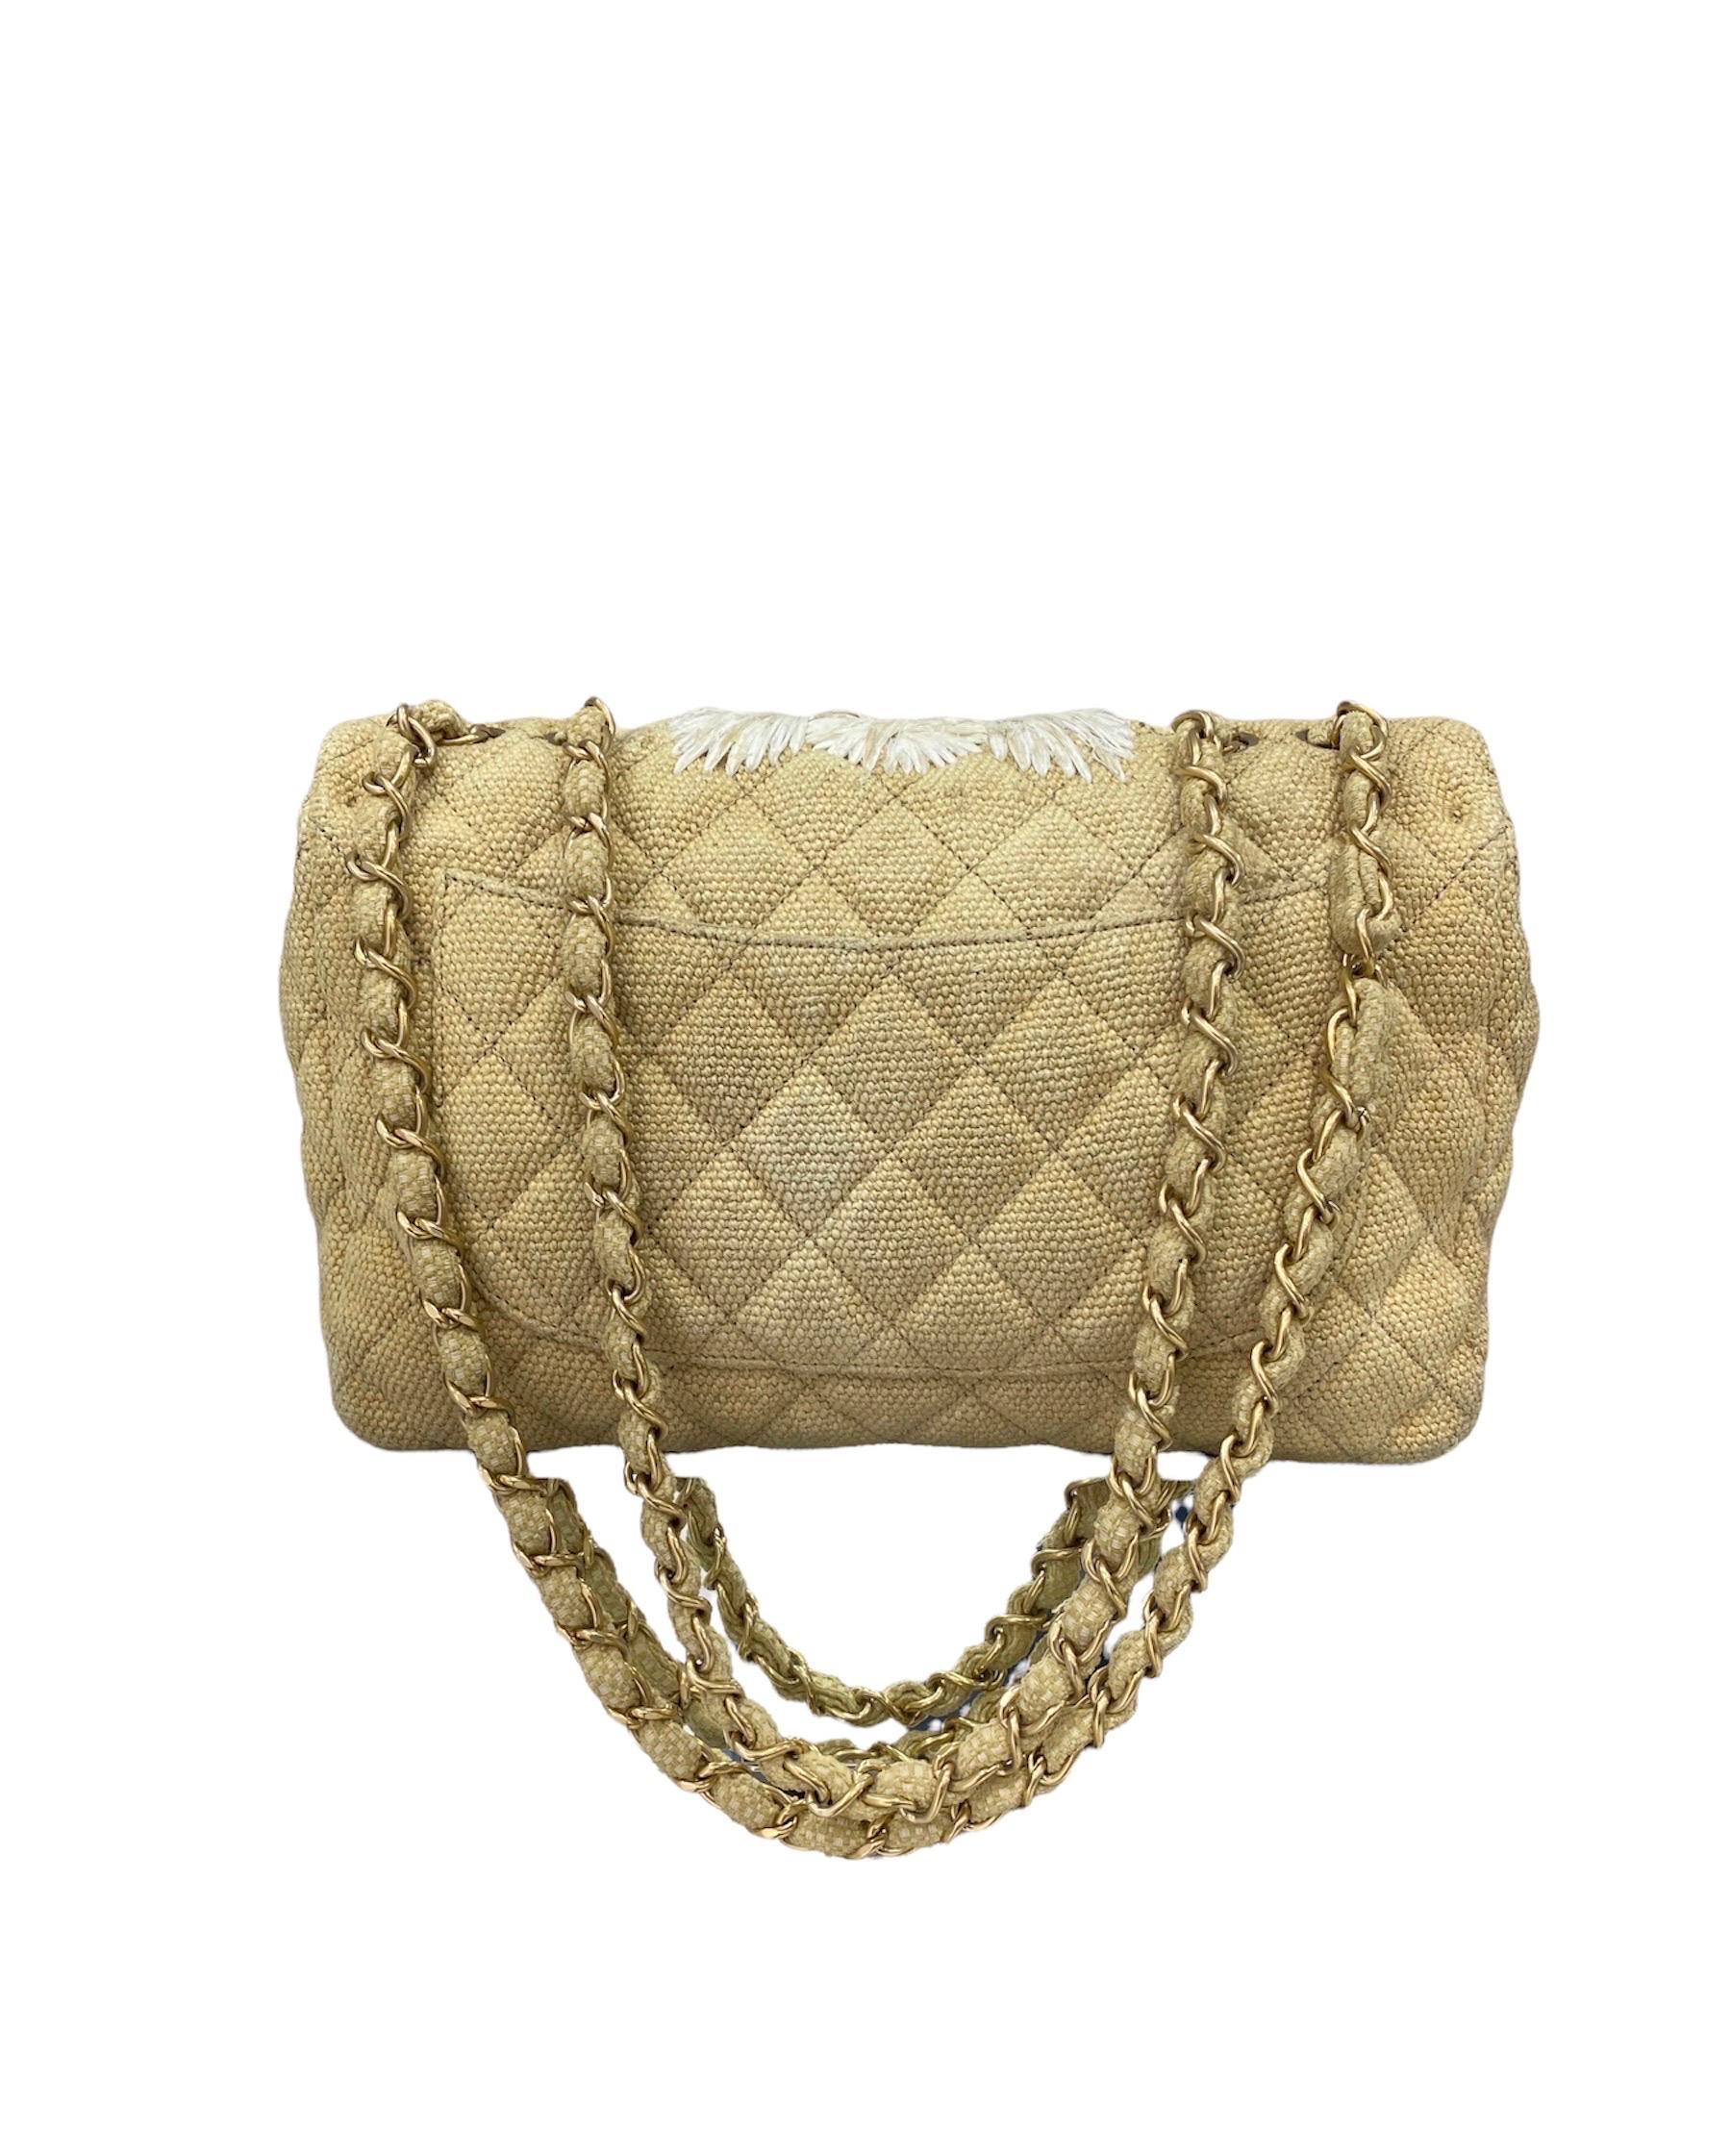 Chanel Flap Beige Canvas Flowers Borsa a Tracolla In Good Condition For Sale In Torre Del Greco, IT